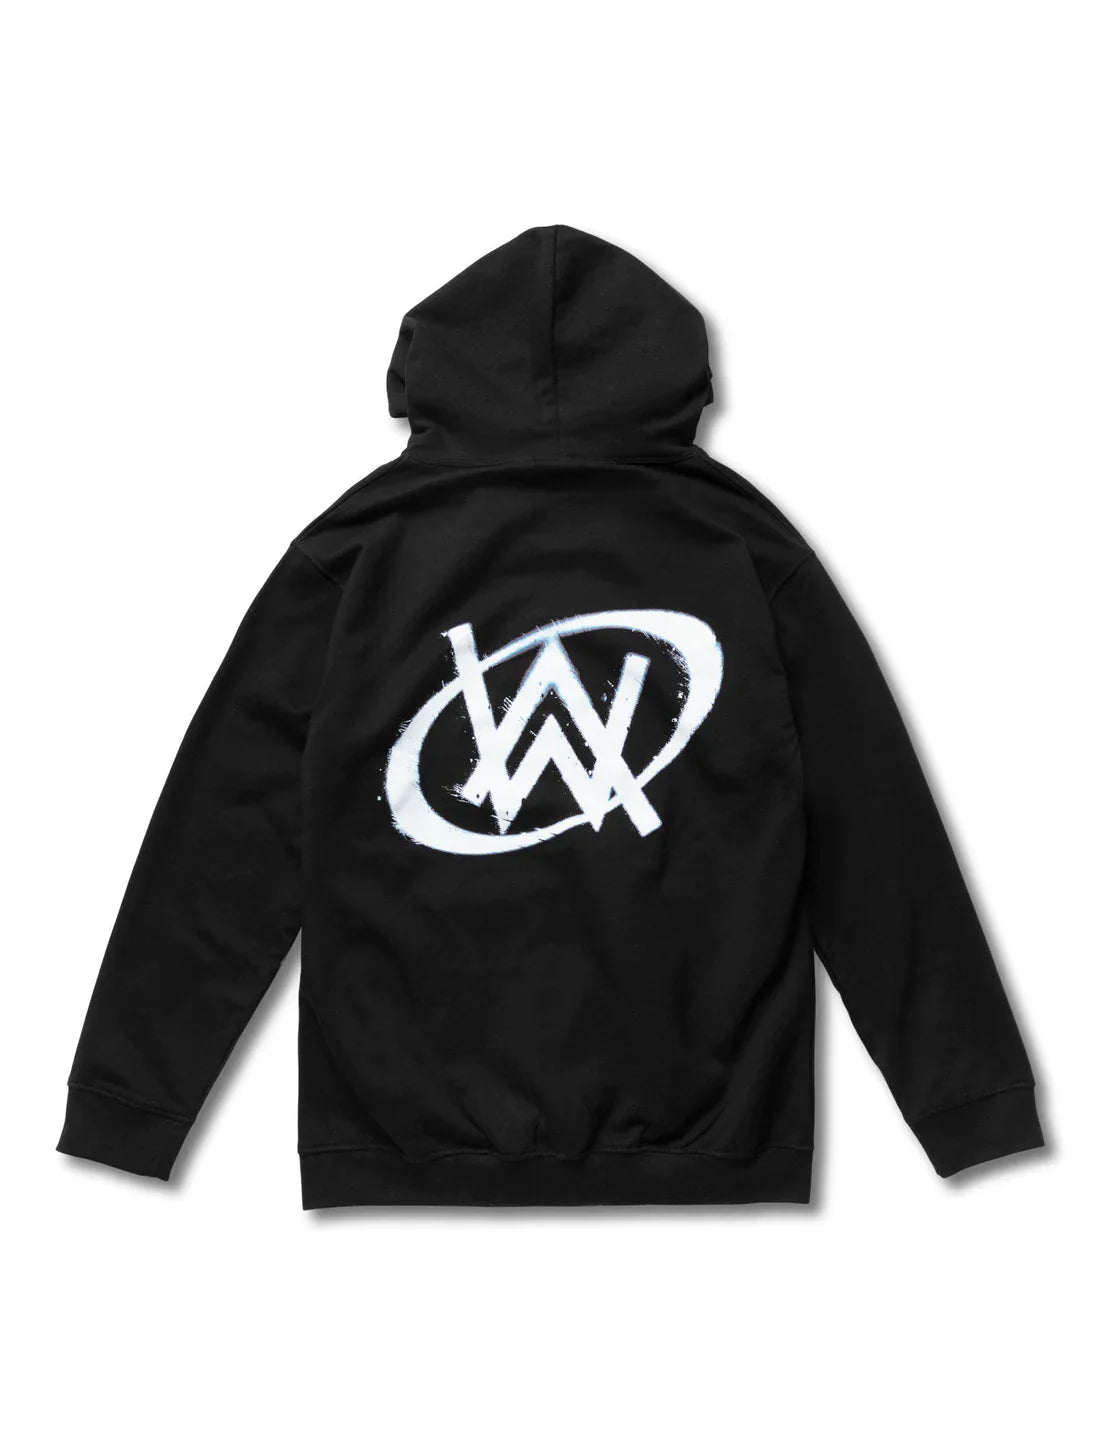 Back view of a black hoodie featuring a bold white Alan Walker logo, perfect for fans flaunting their music allegiance.